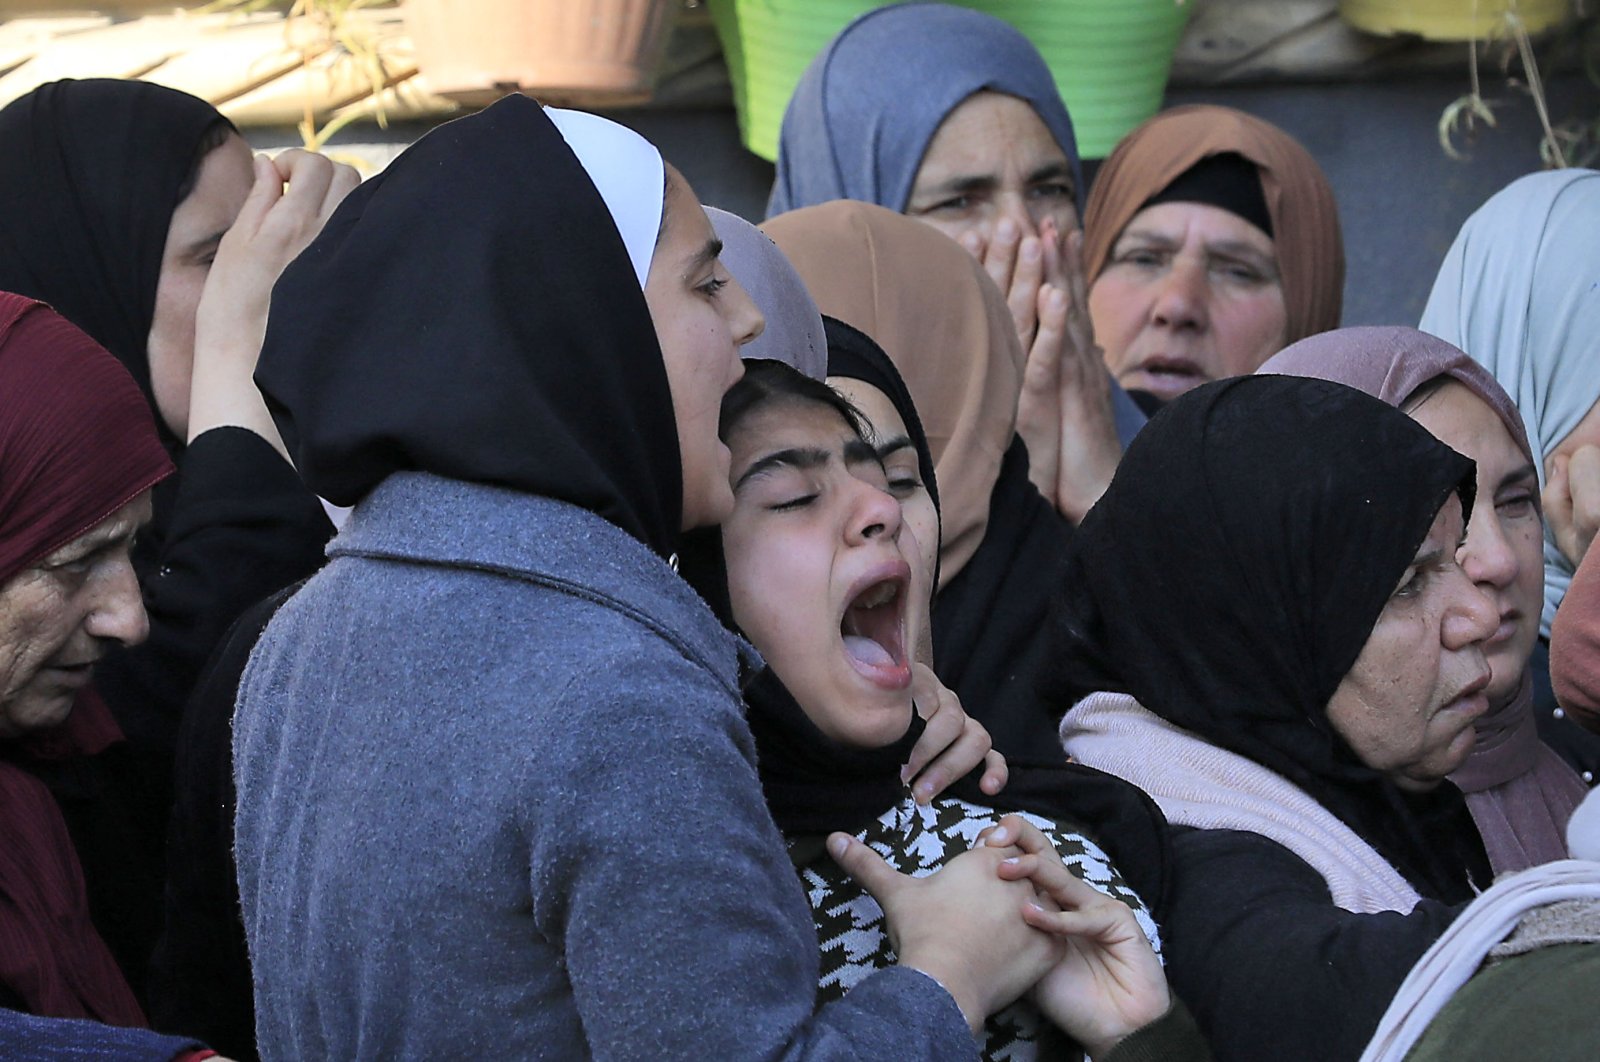 Relatives mourn during the funeral of Ahmed Atef Daraghmeh, 23, killed during clashes with Israeli forces in occupied West Bank, Palestine, Dec. 22, 2022. (AFP Photo)